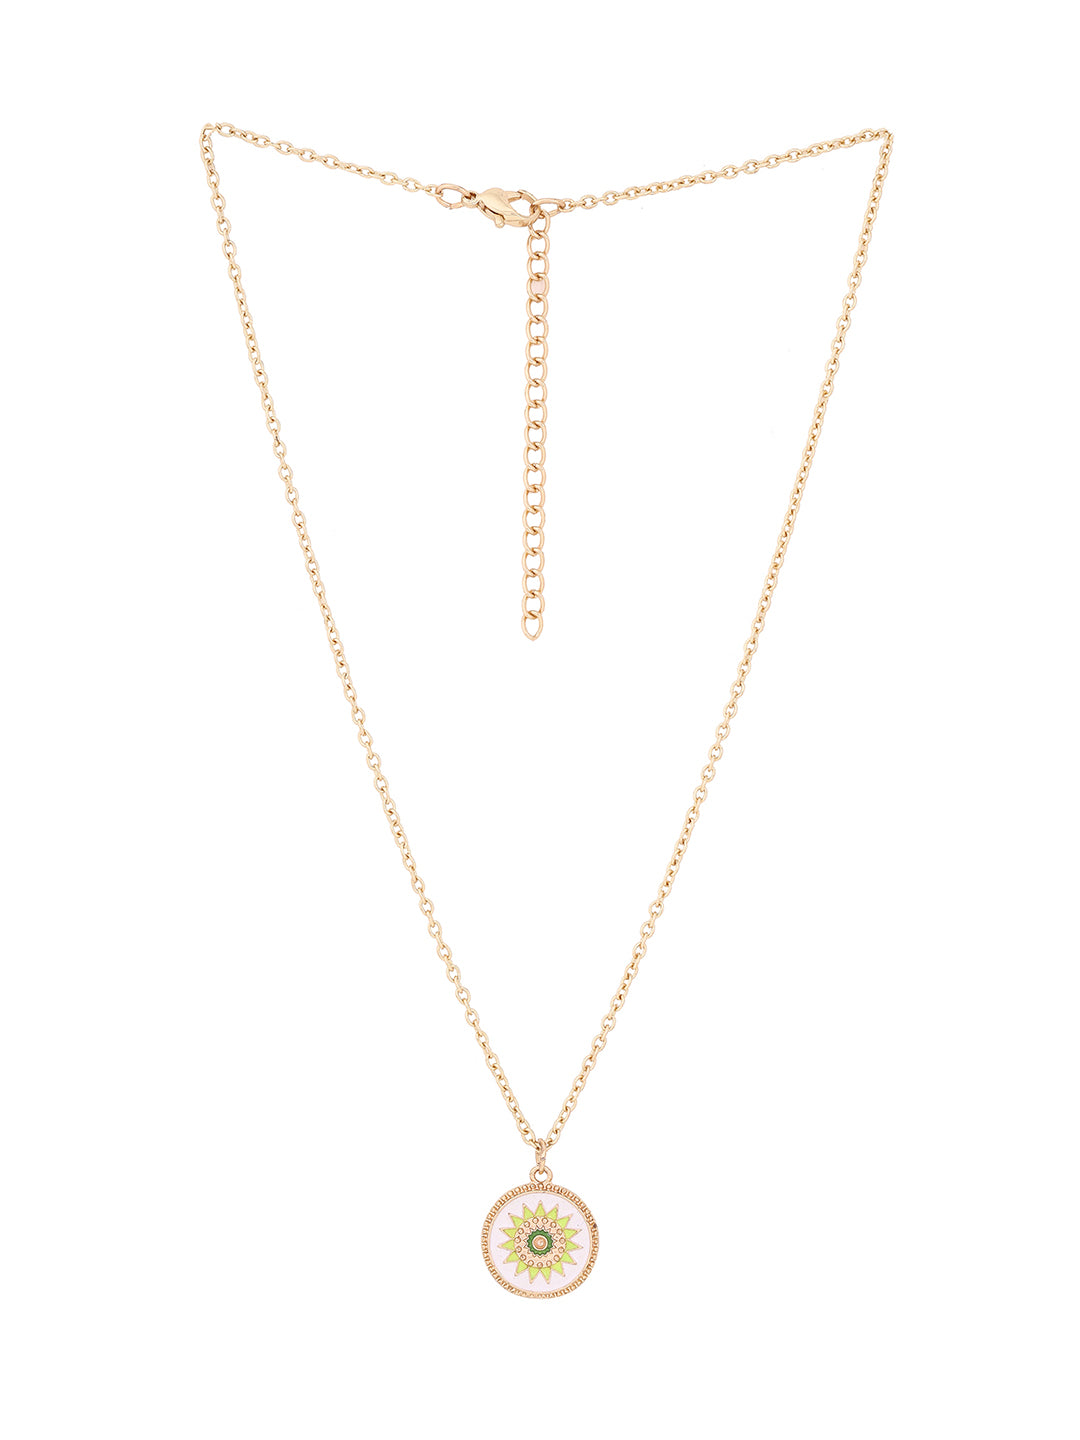 Priyaasi White Flower Pendant Gold Plated Necklace